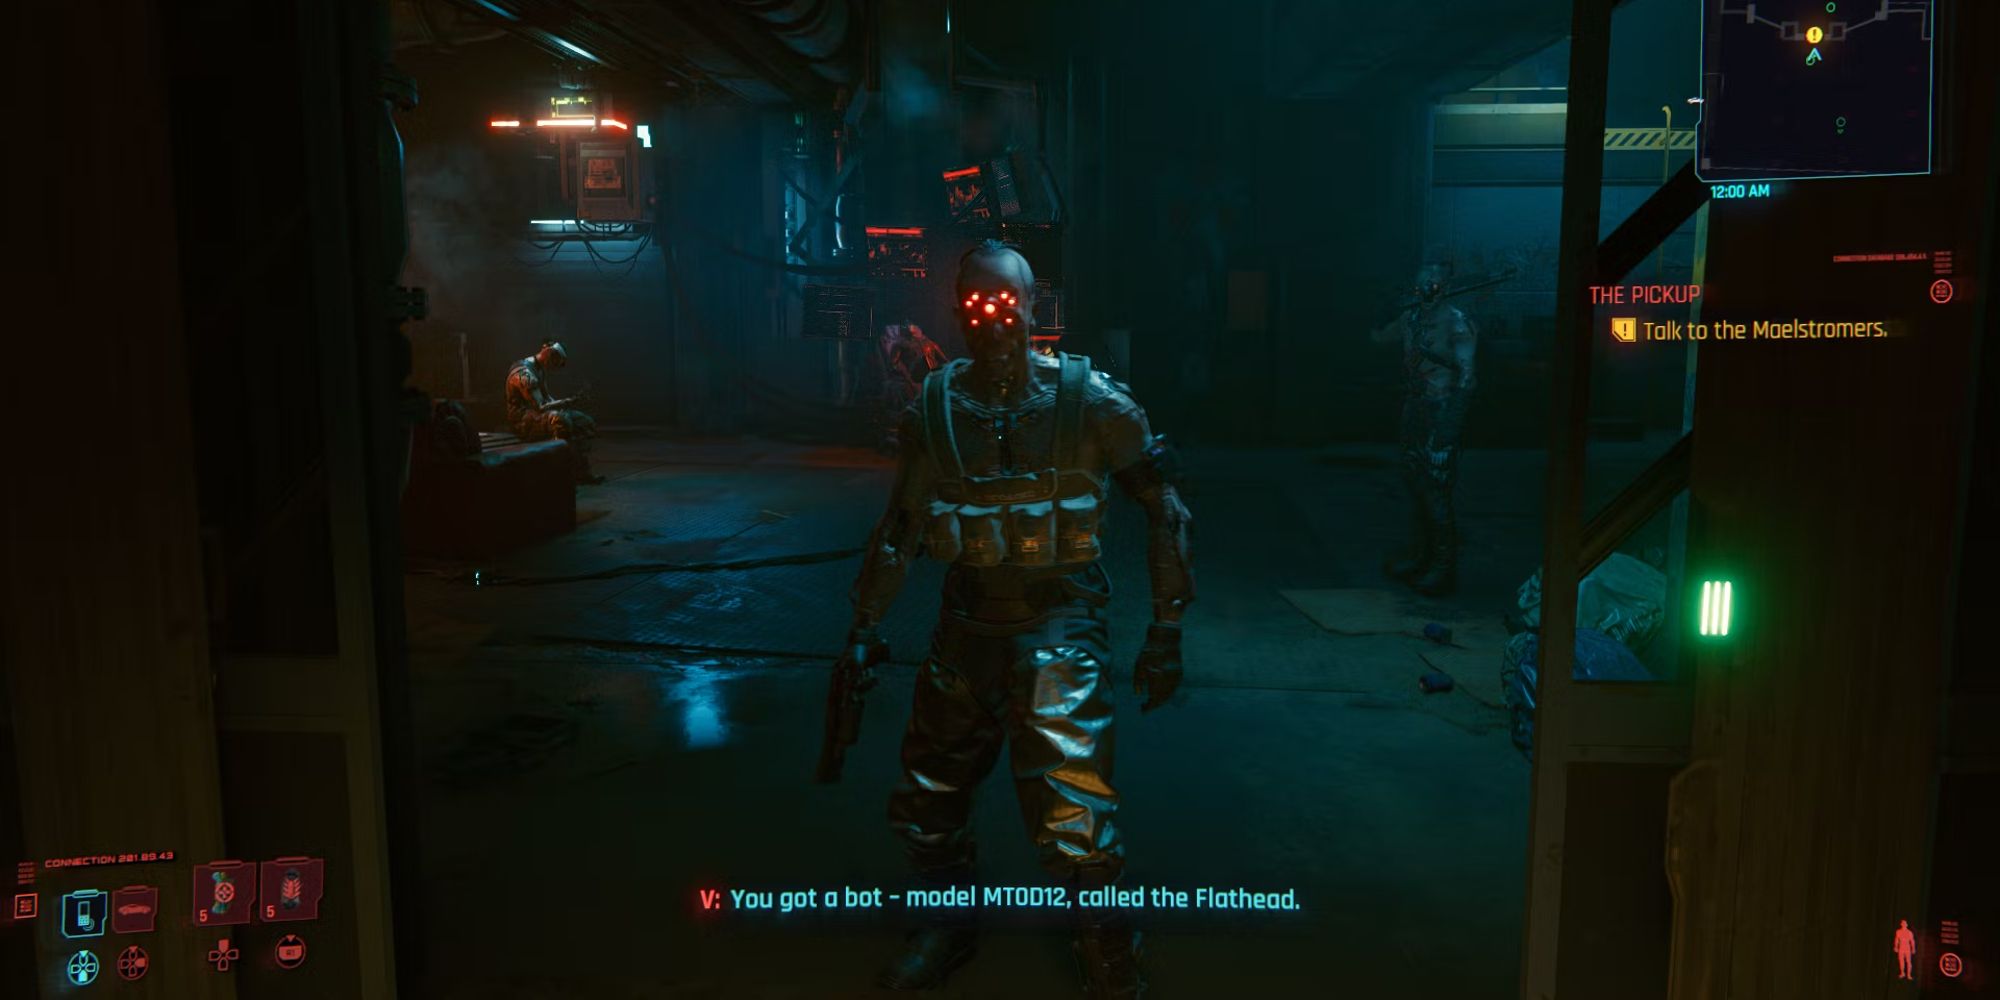 Dum-Dum receiving V and Jackie in the Maelstrom Base, in Cyberpunk 2077.